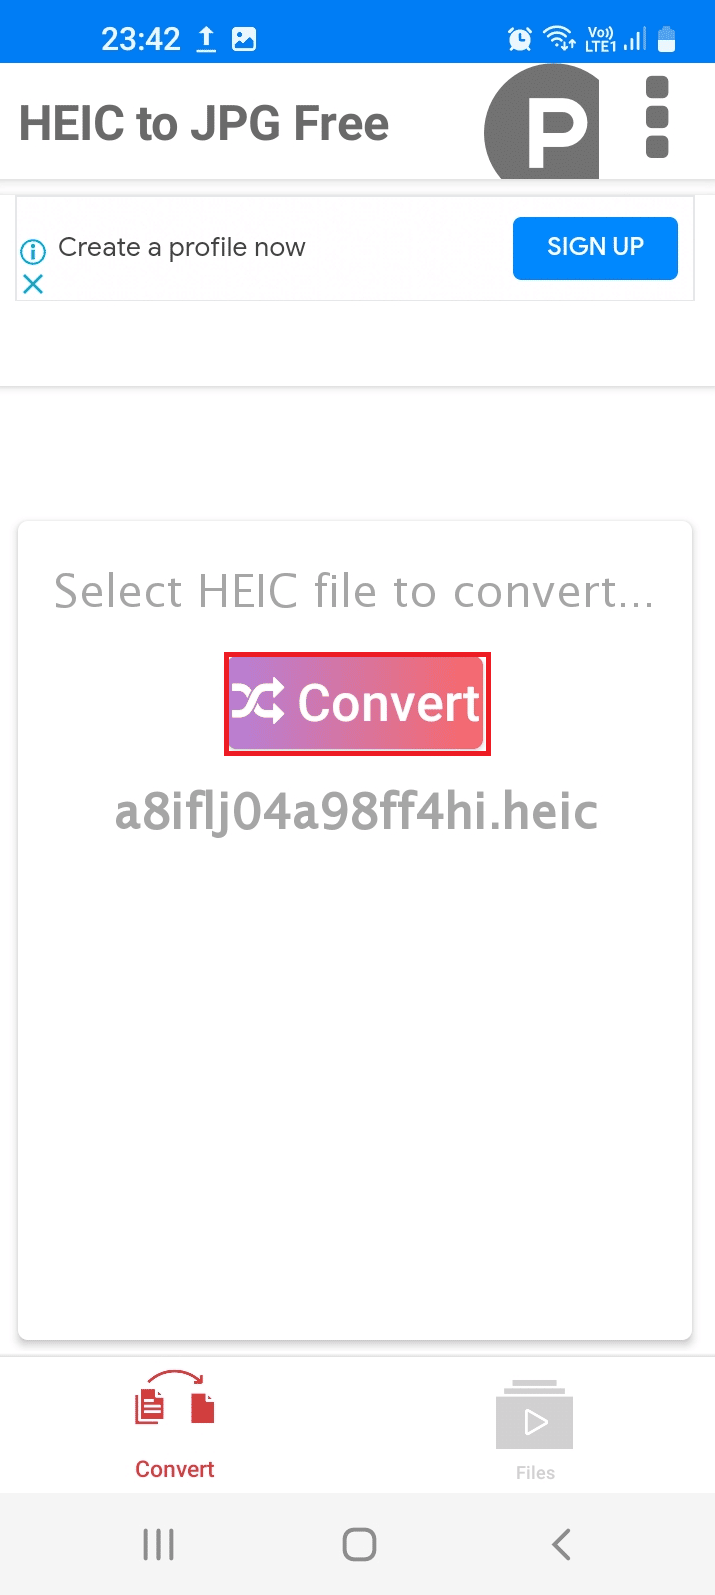 Tap on the Convert button